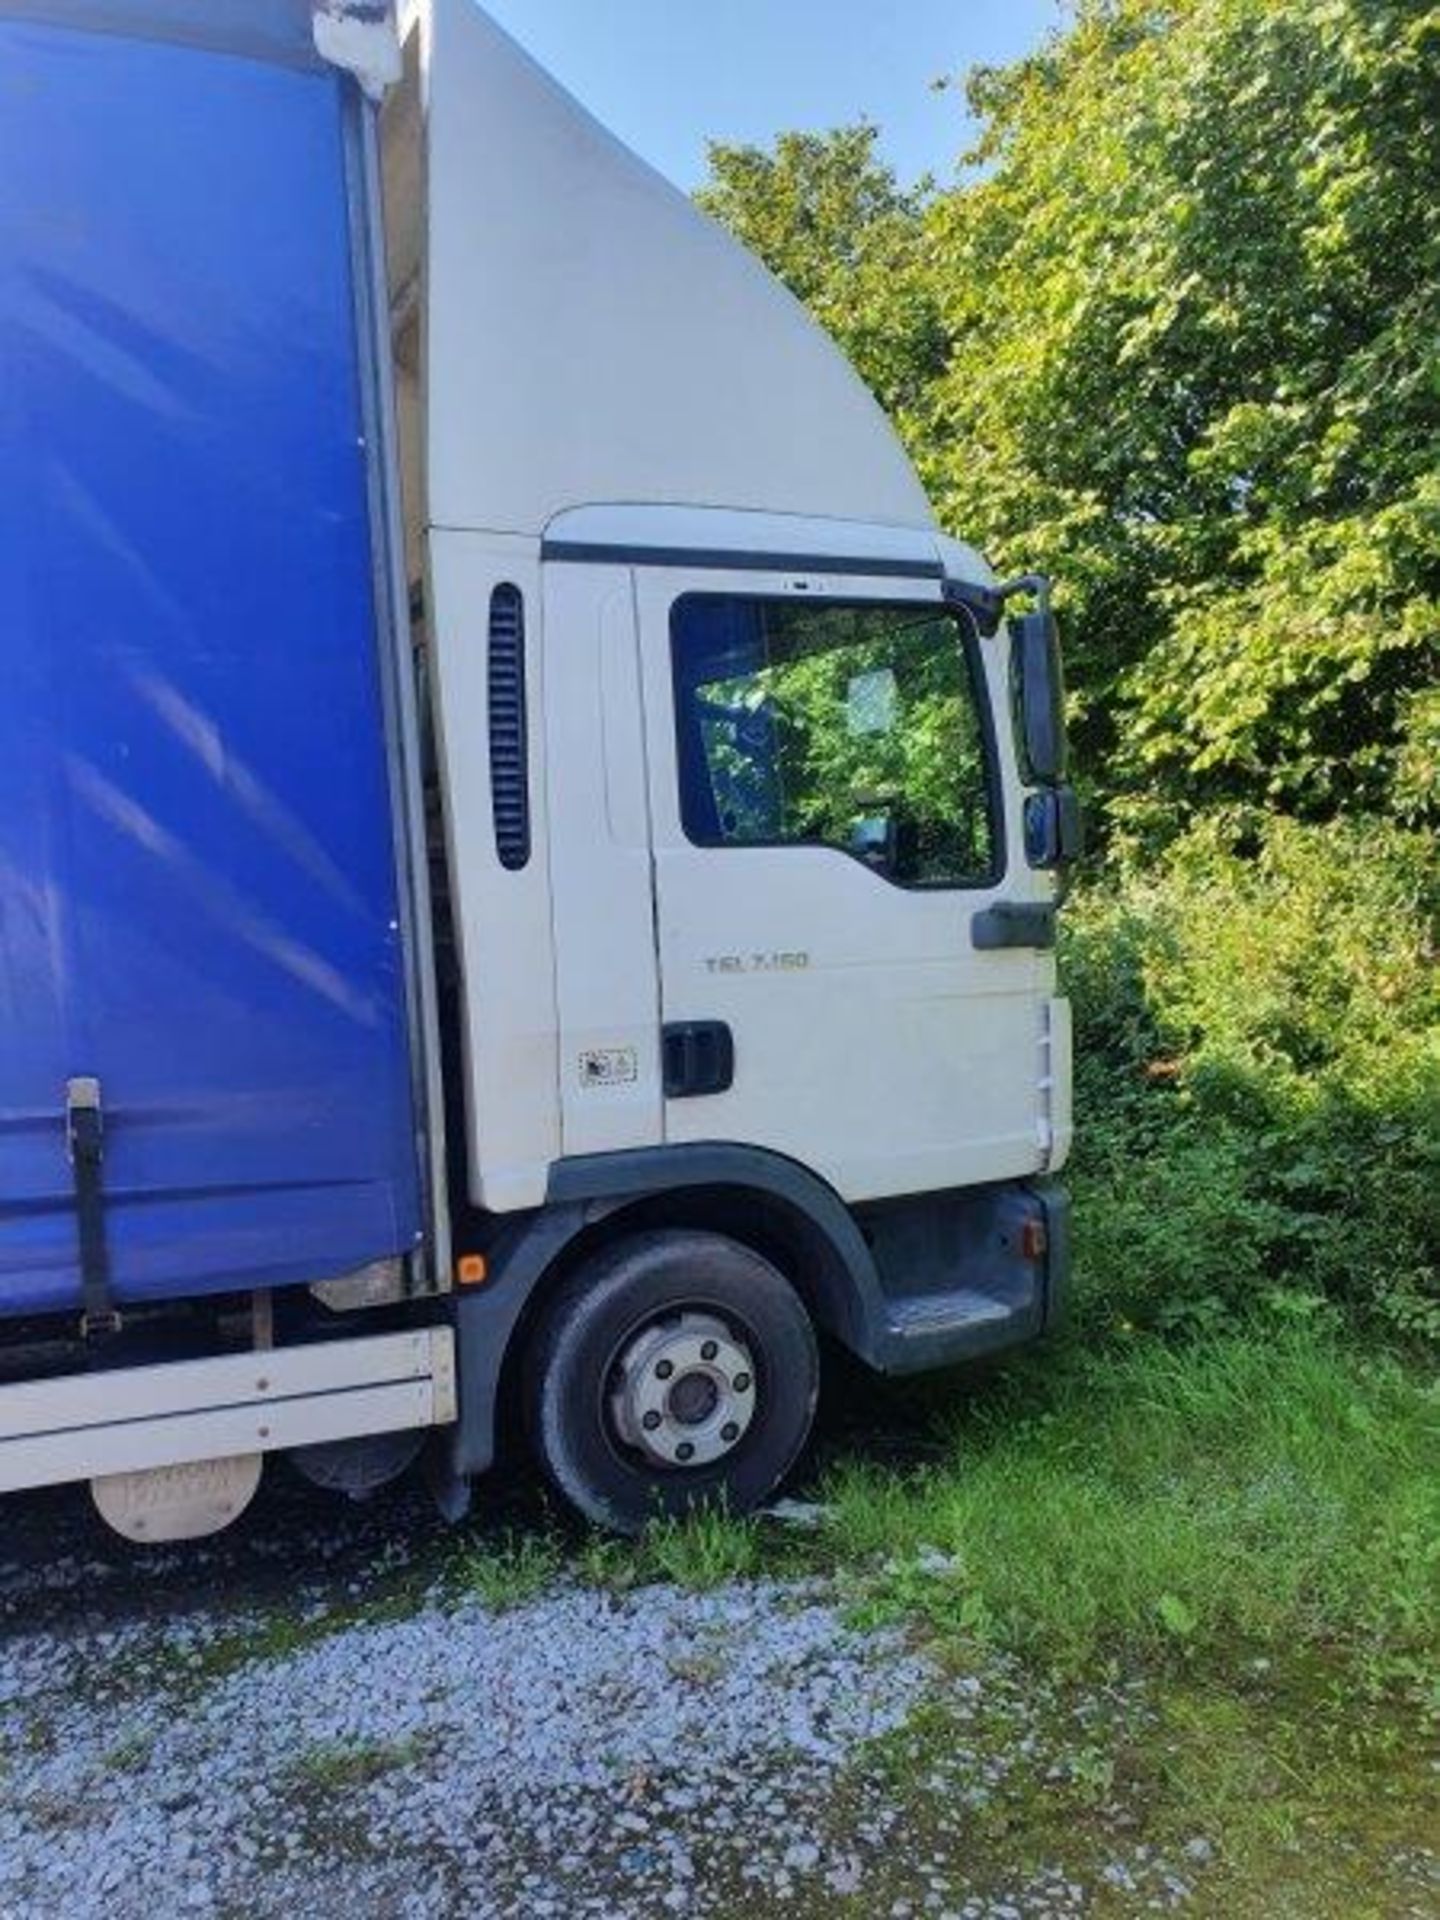 MAN 8.150 7.5 Tonne Curtain Sided Lorry with Day Cab and 1 Tonne Tail Lift. (This vehicle is an